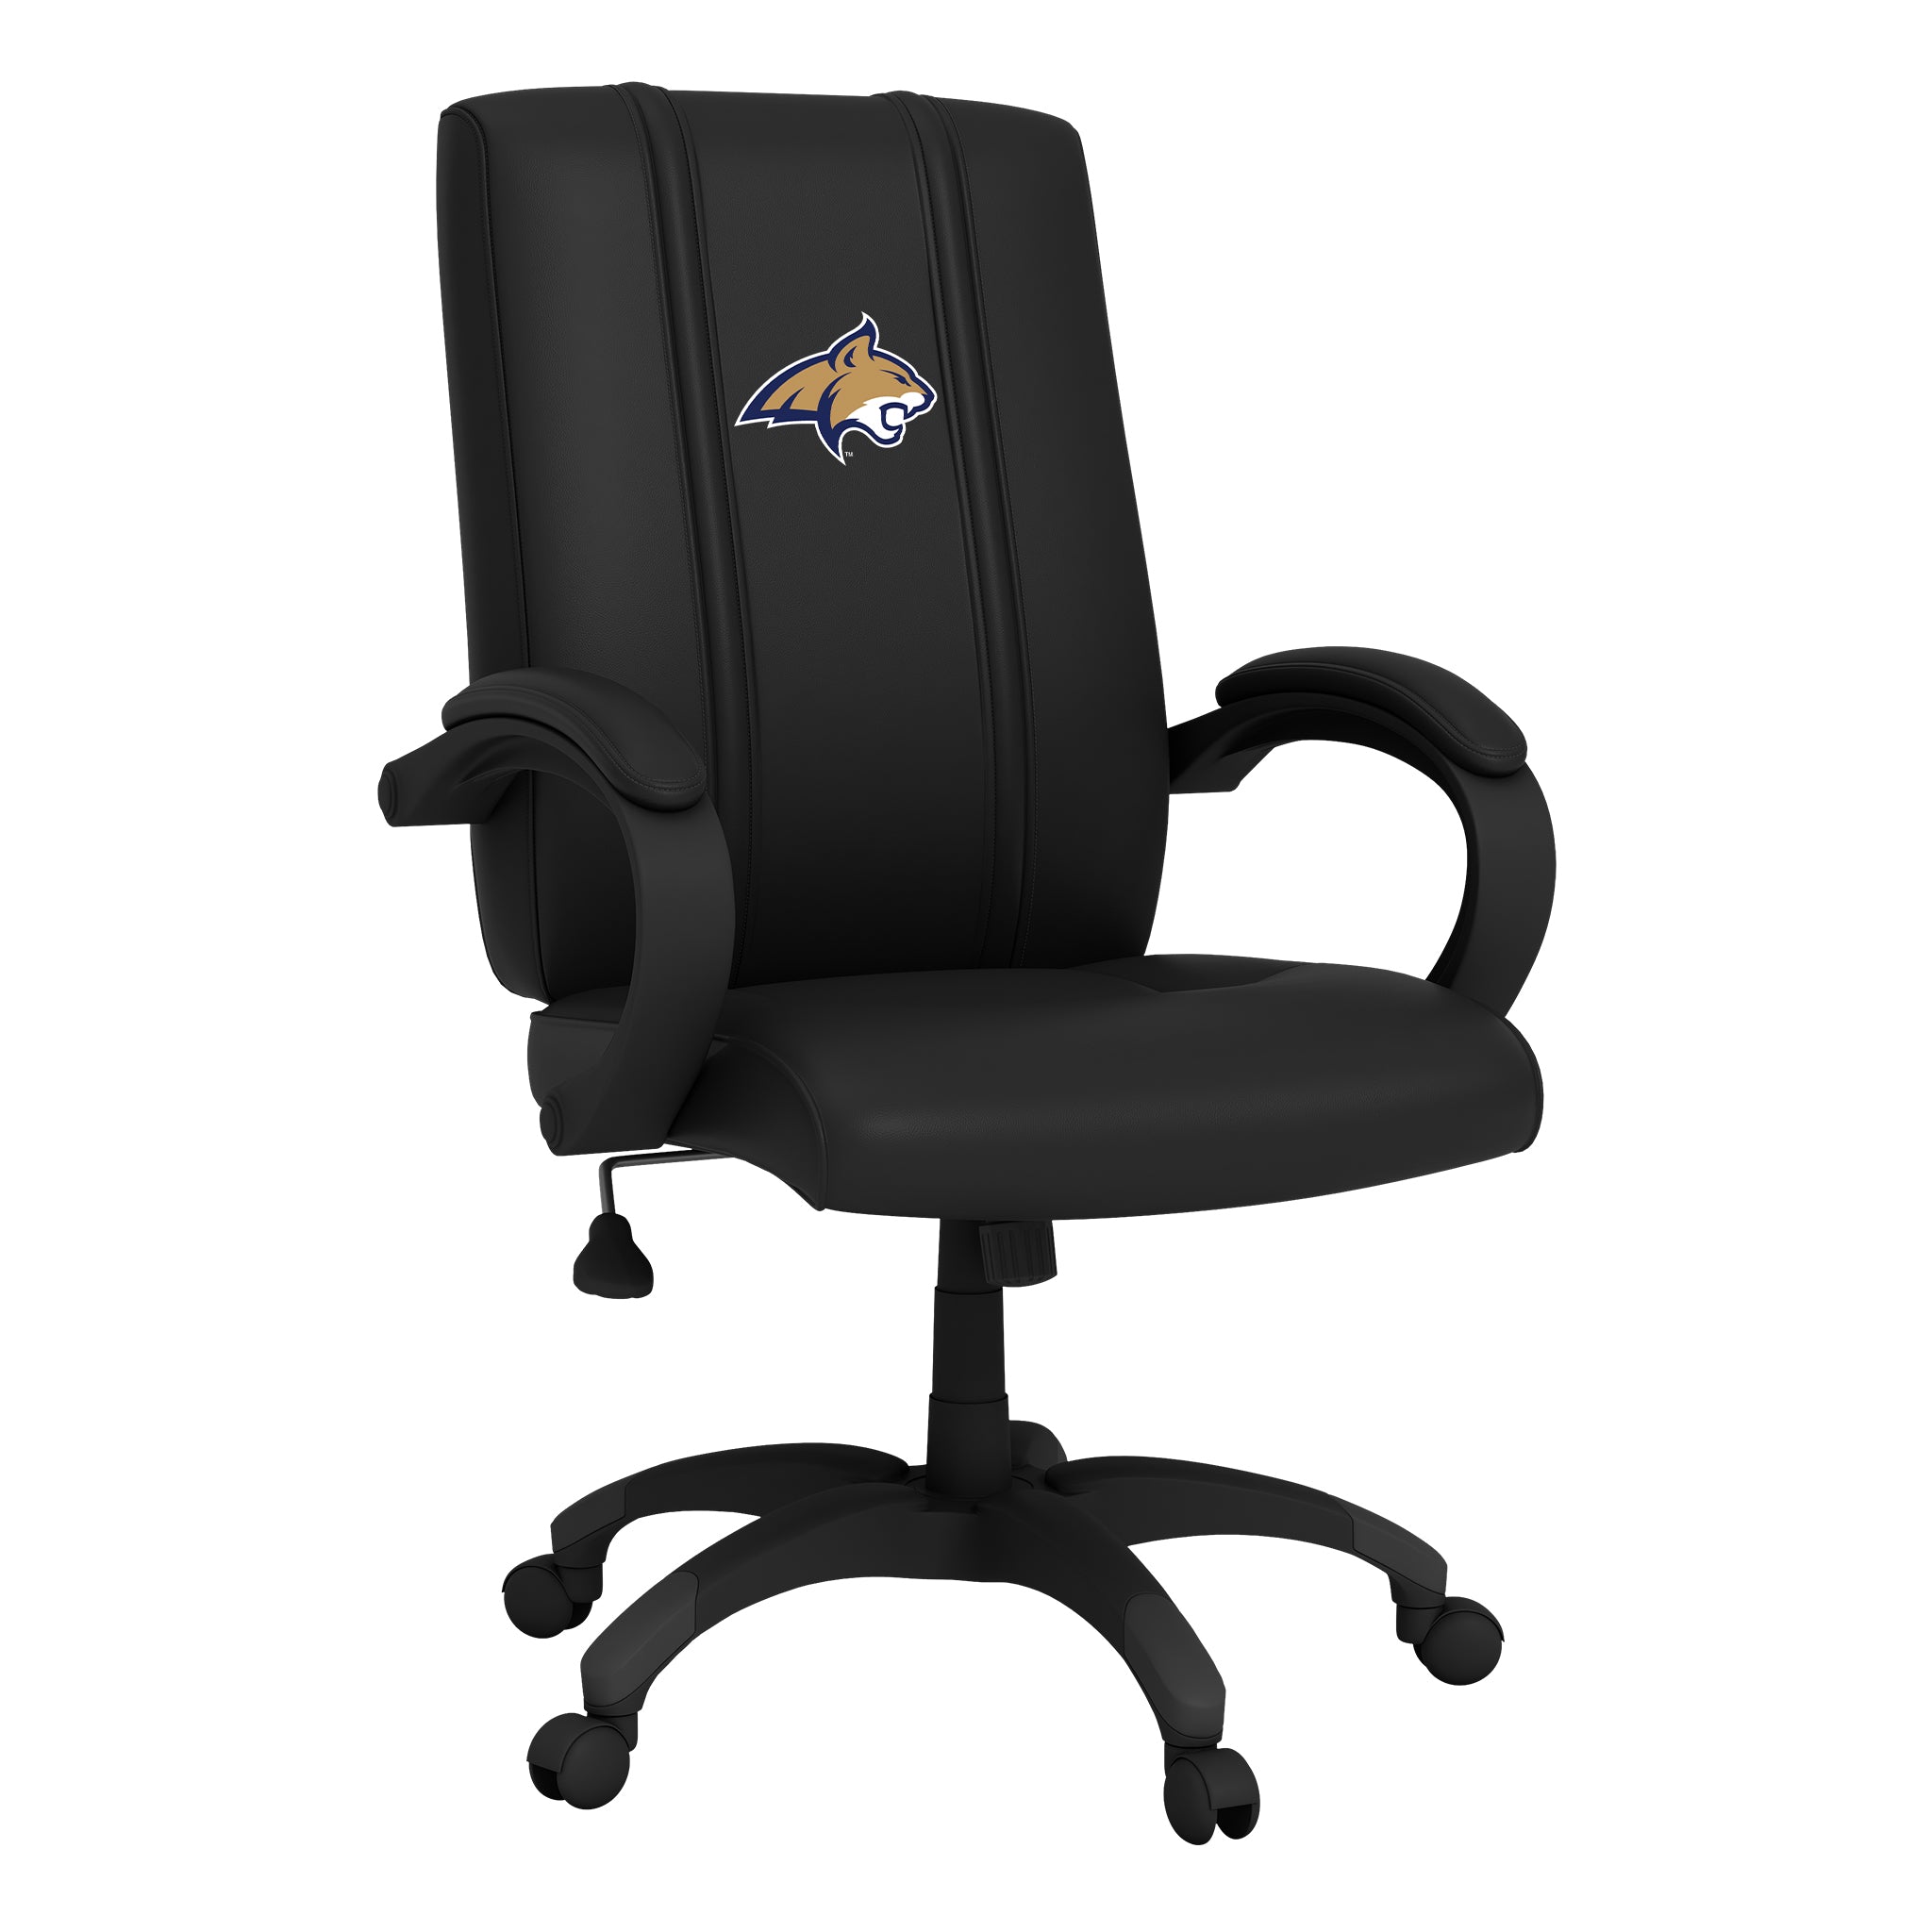 Montana State Bobcats Office Chair 1000 with Montana State Bobcats Primary Logo